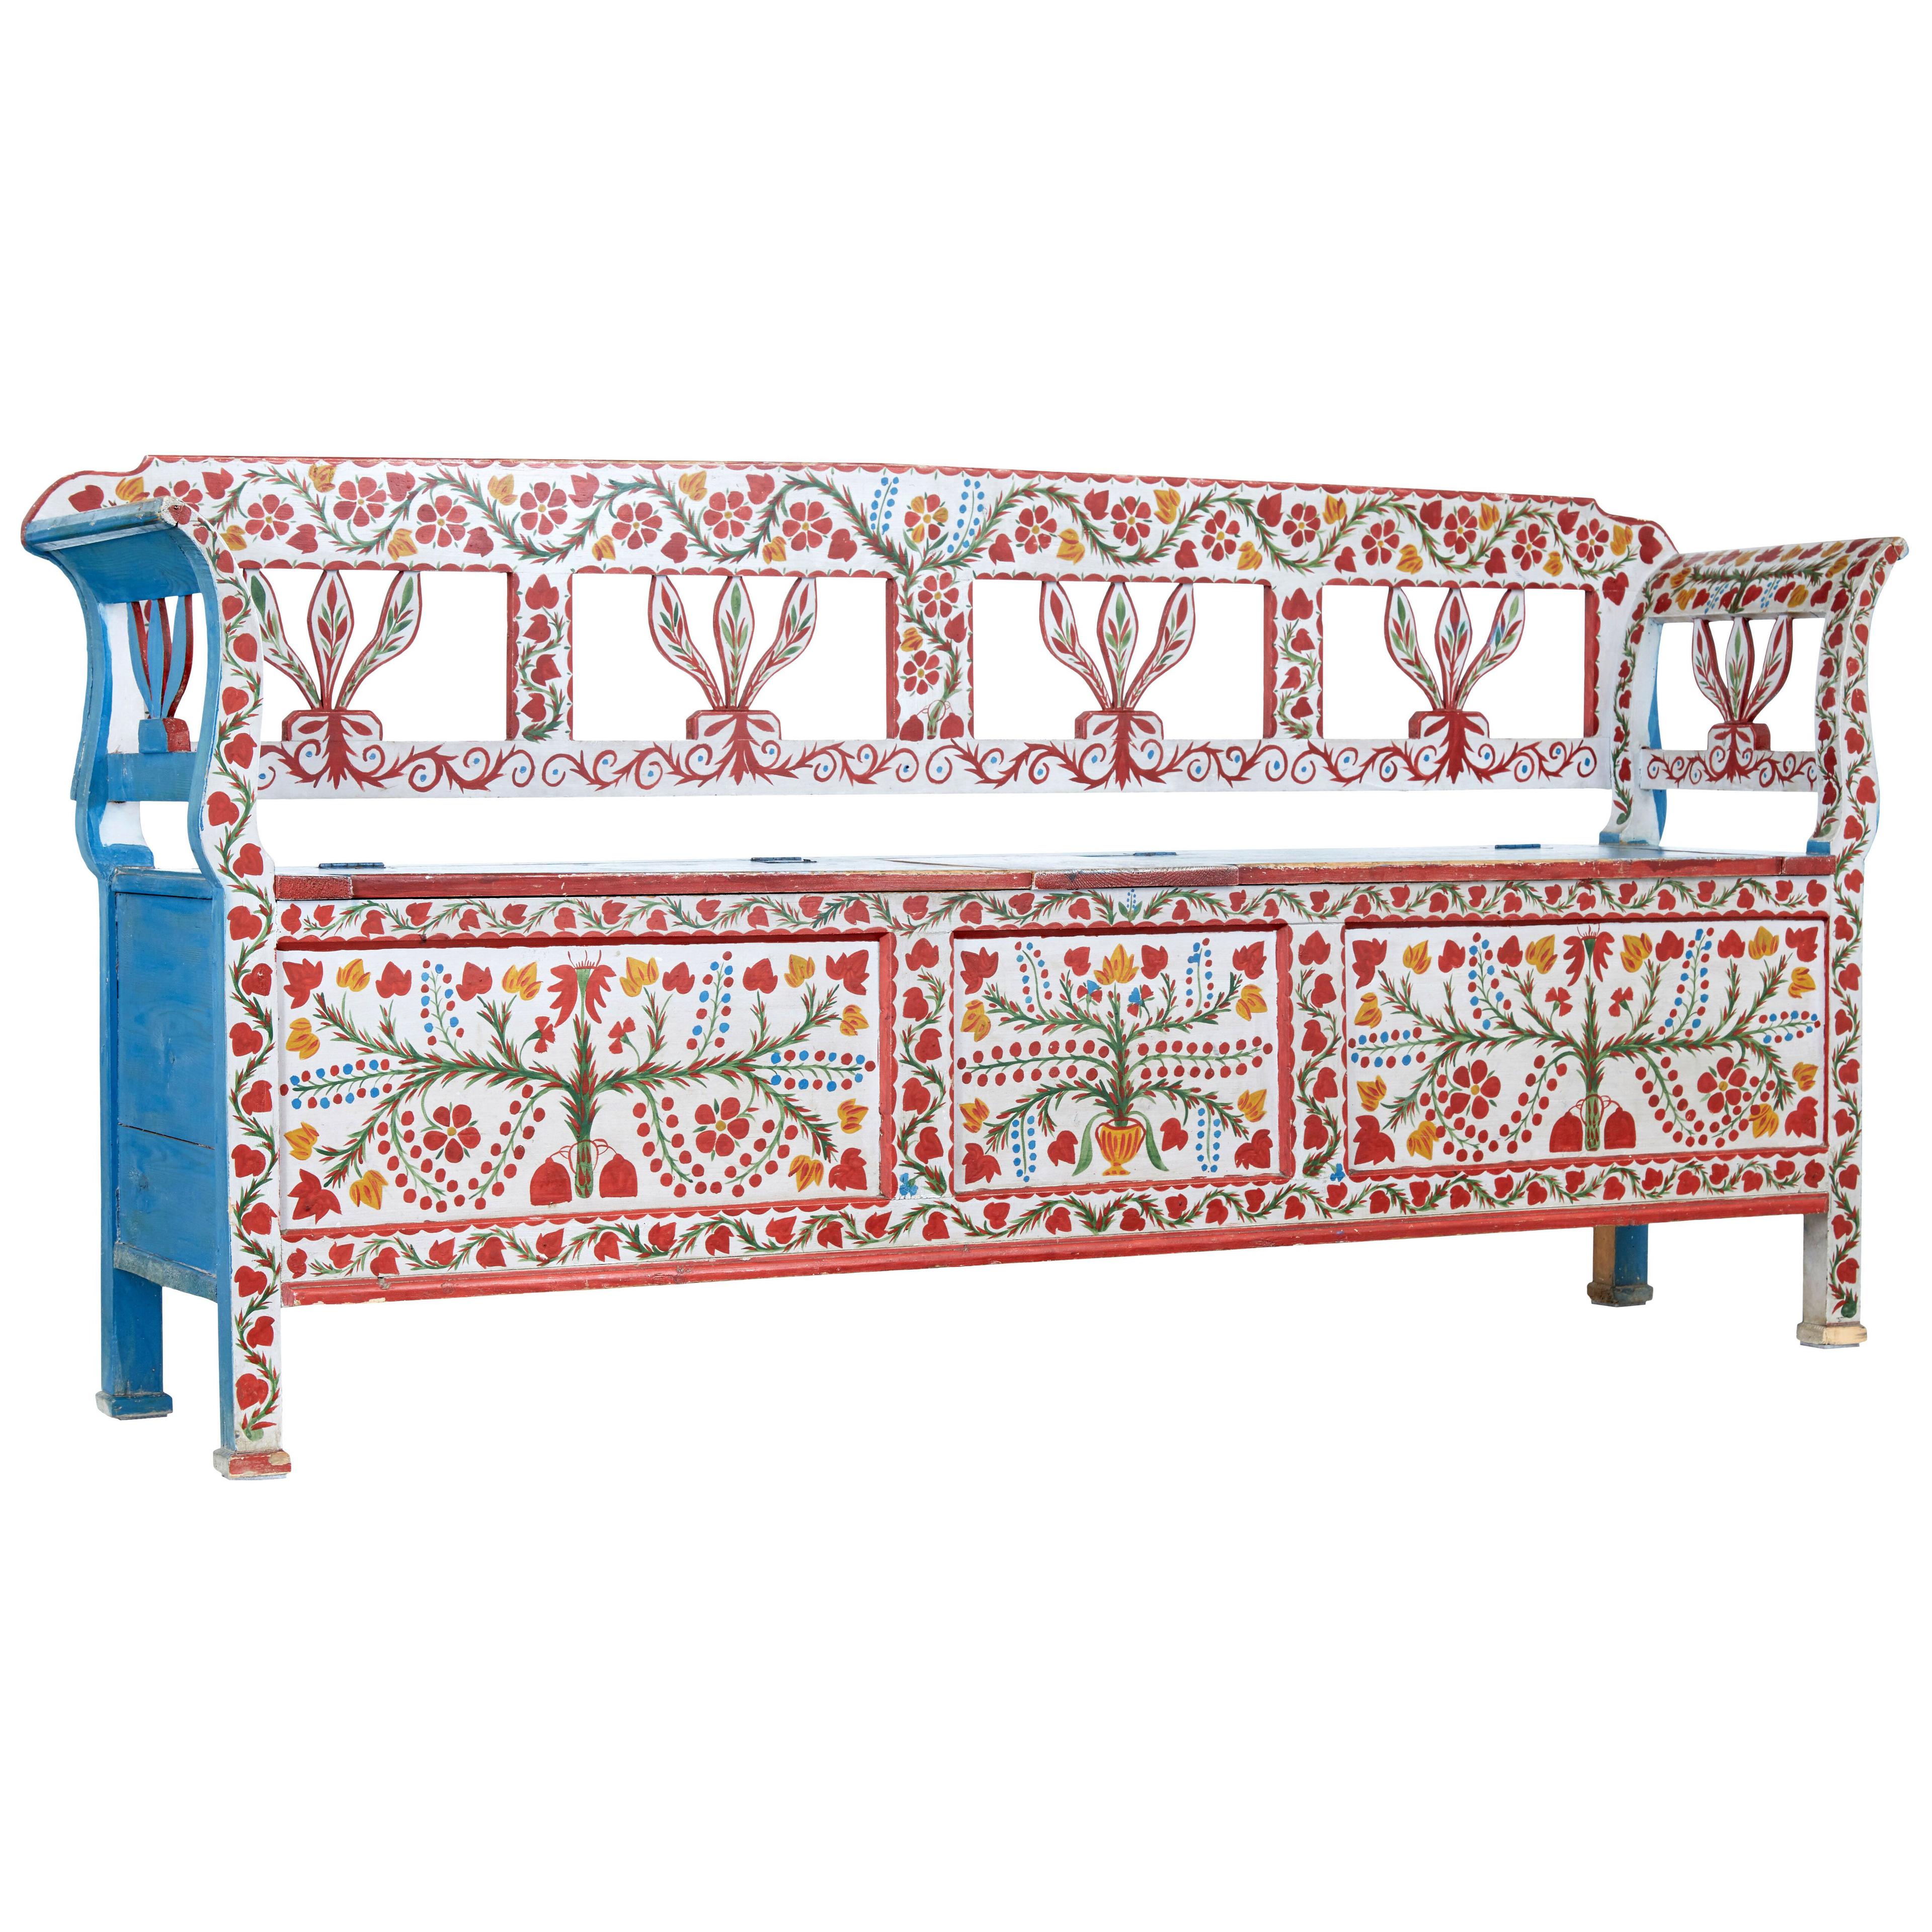 EARLY 20TH CENTURY HAND PAINTED FOLK ART BENCH